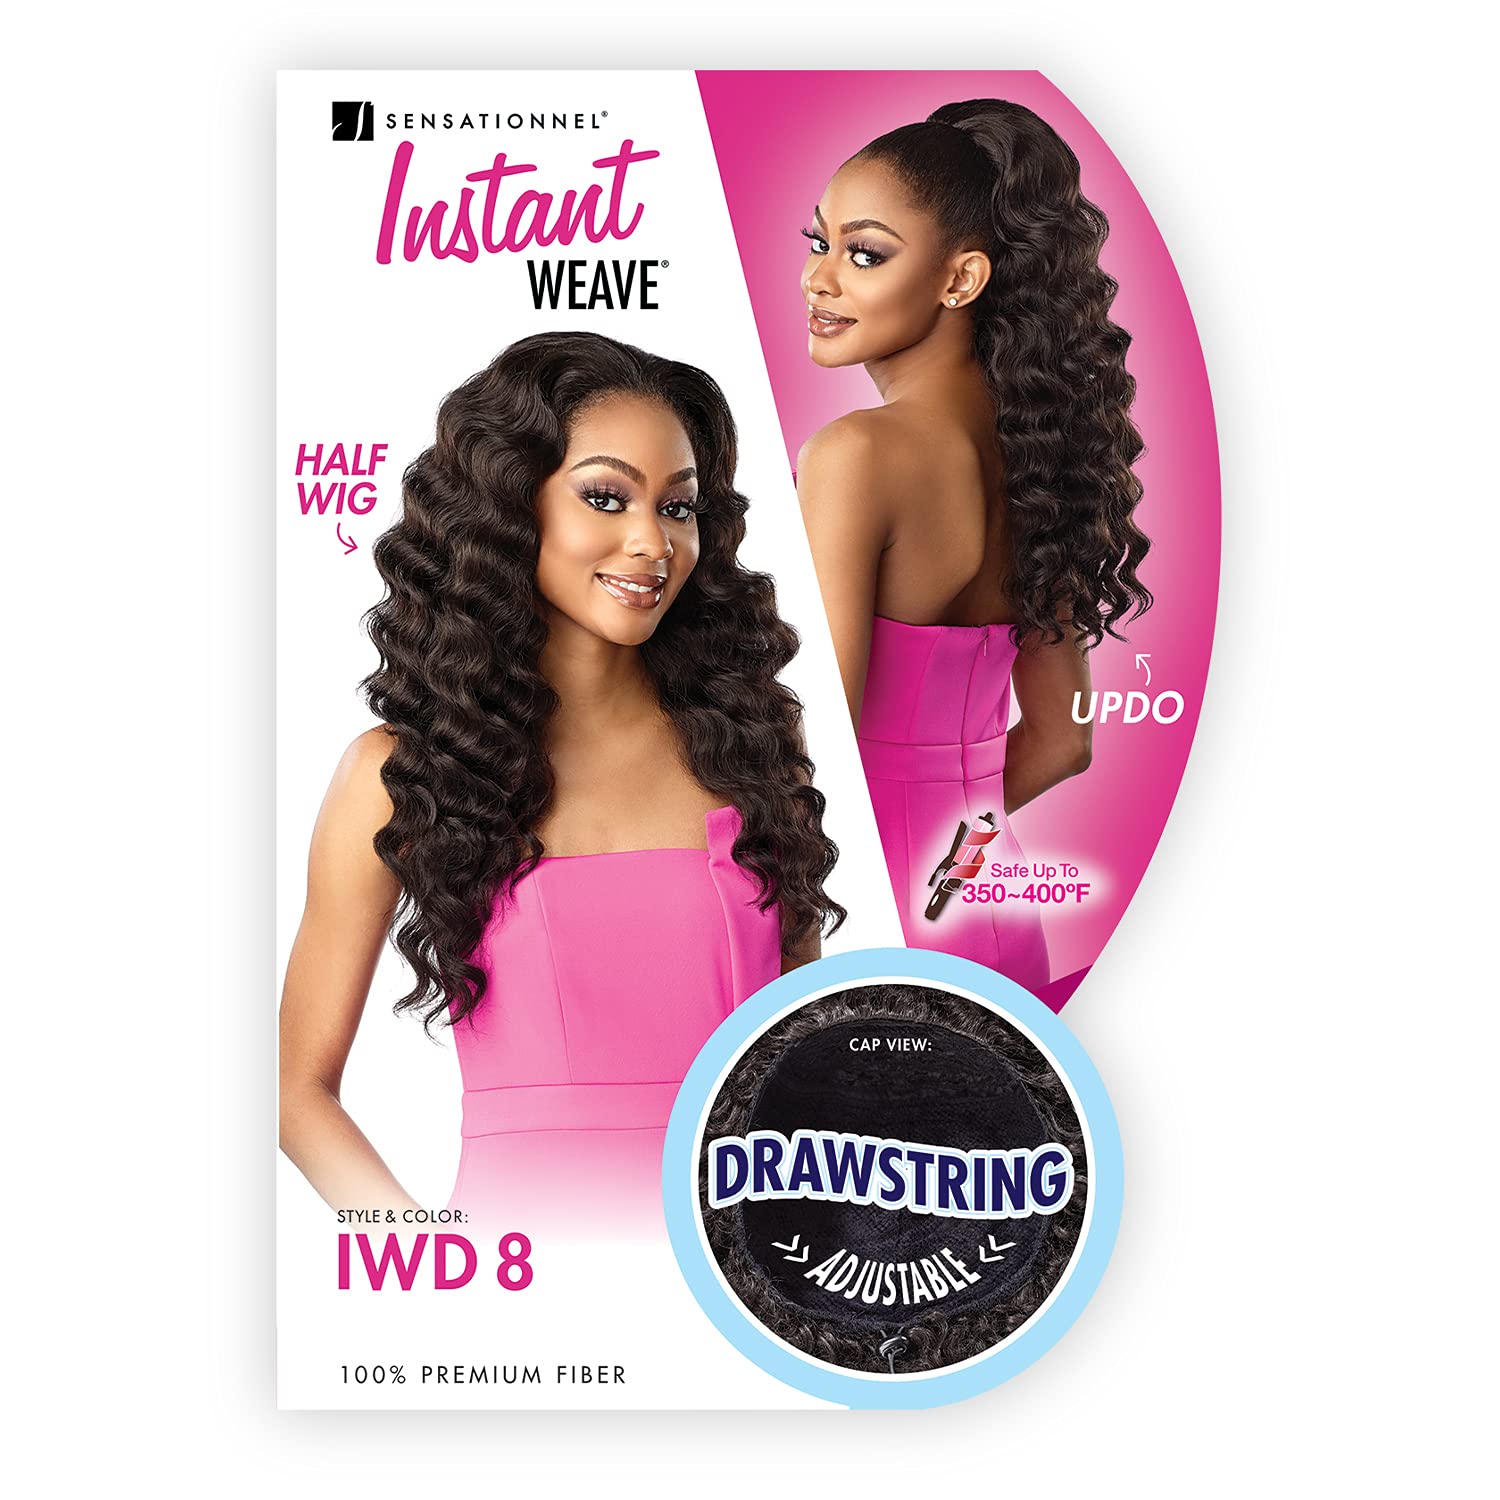 Sensationnel hair extensions - Instant weave drawstring cap 008 Find Your New Look Today!